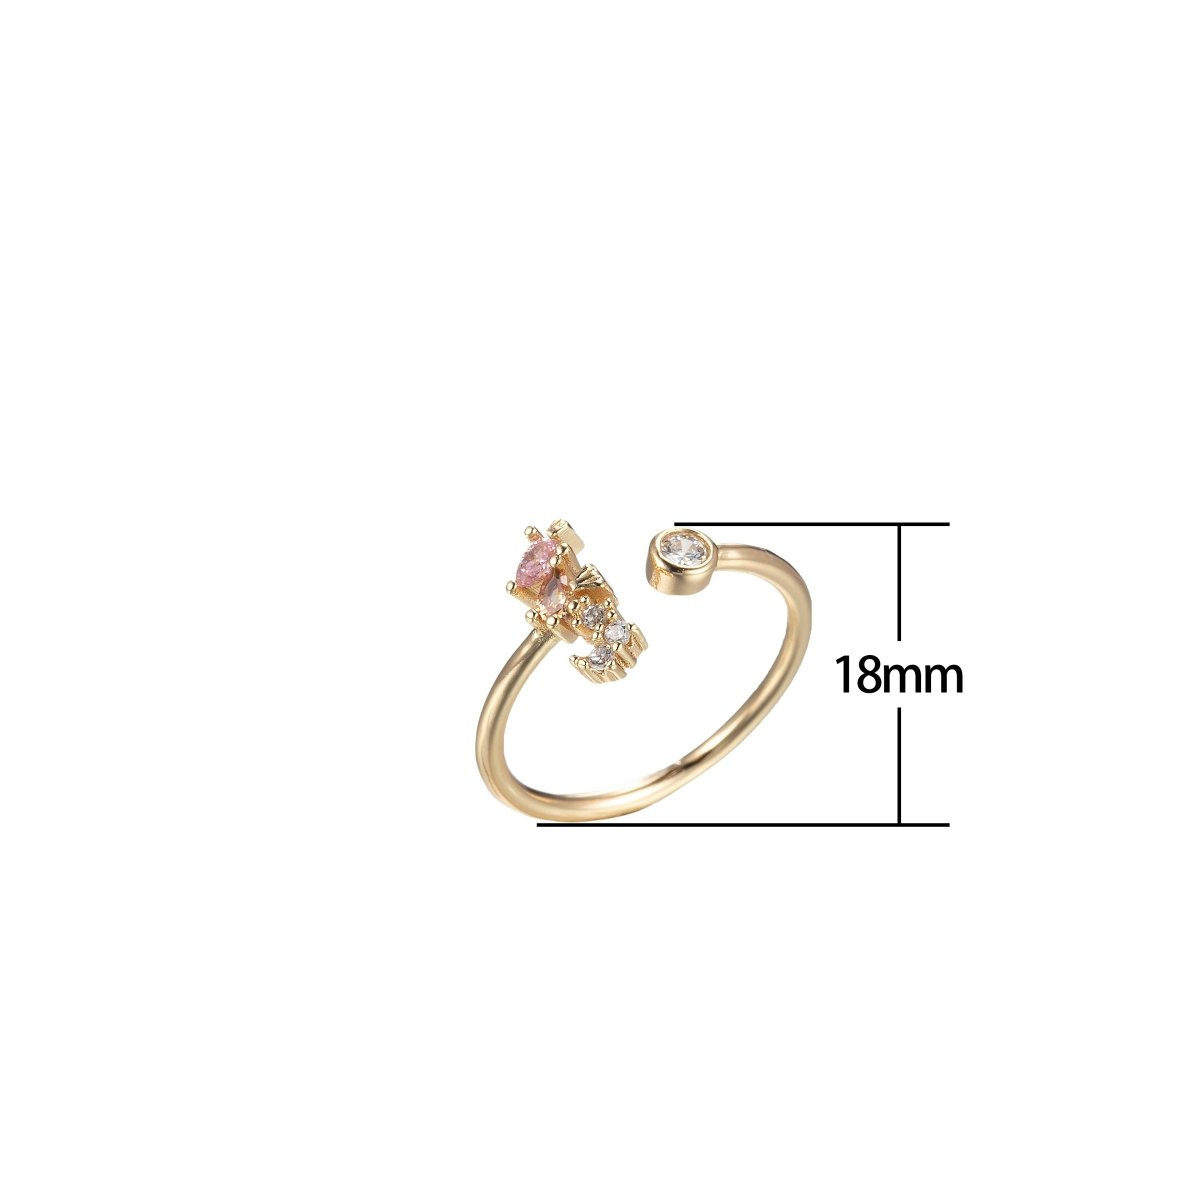 Gold Sea Horse Ring Open Adjustable Ring Animal Under the Sea Inspired O-997 - DLUXCA